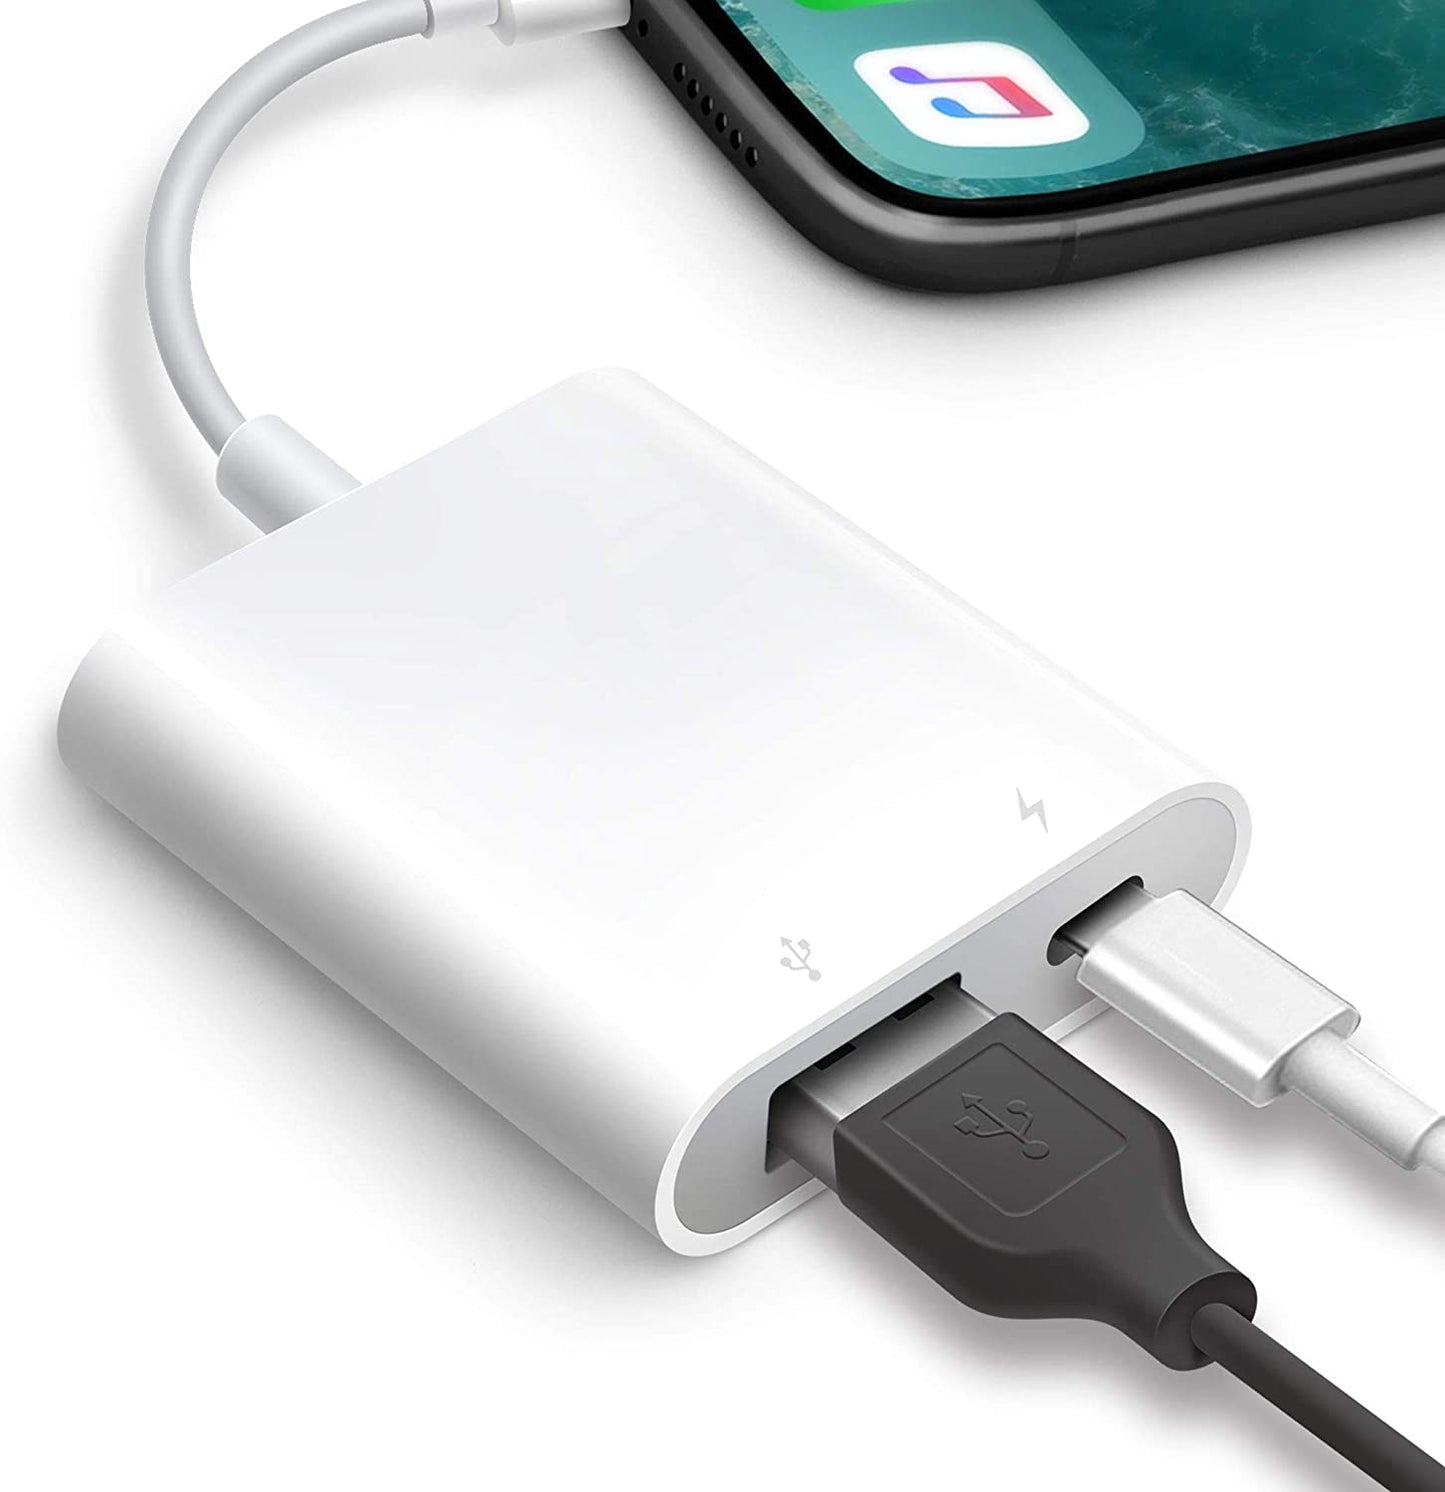 USB adapters for iPhone and Android